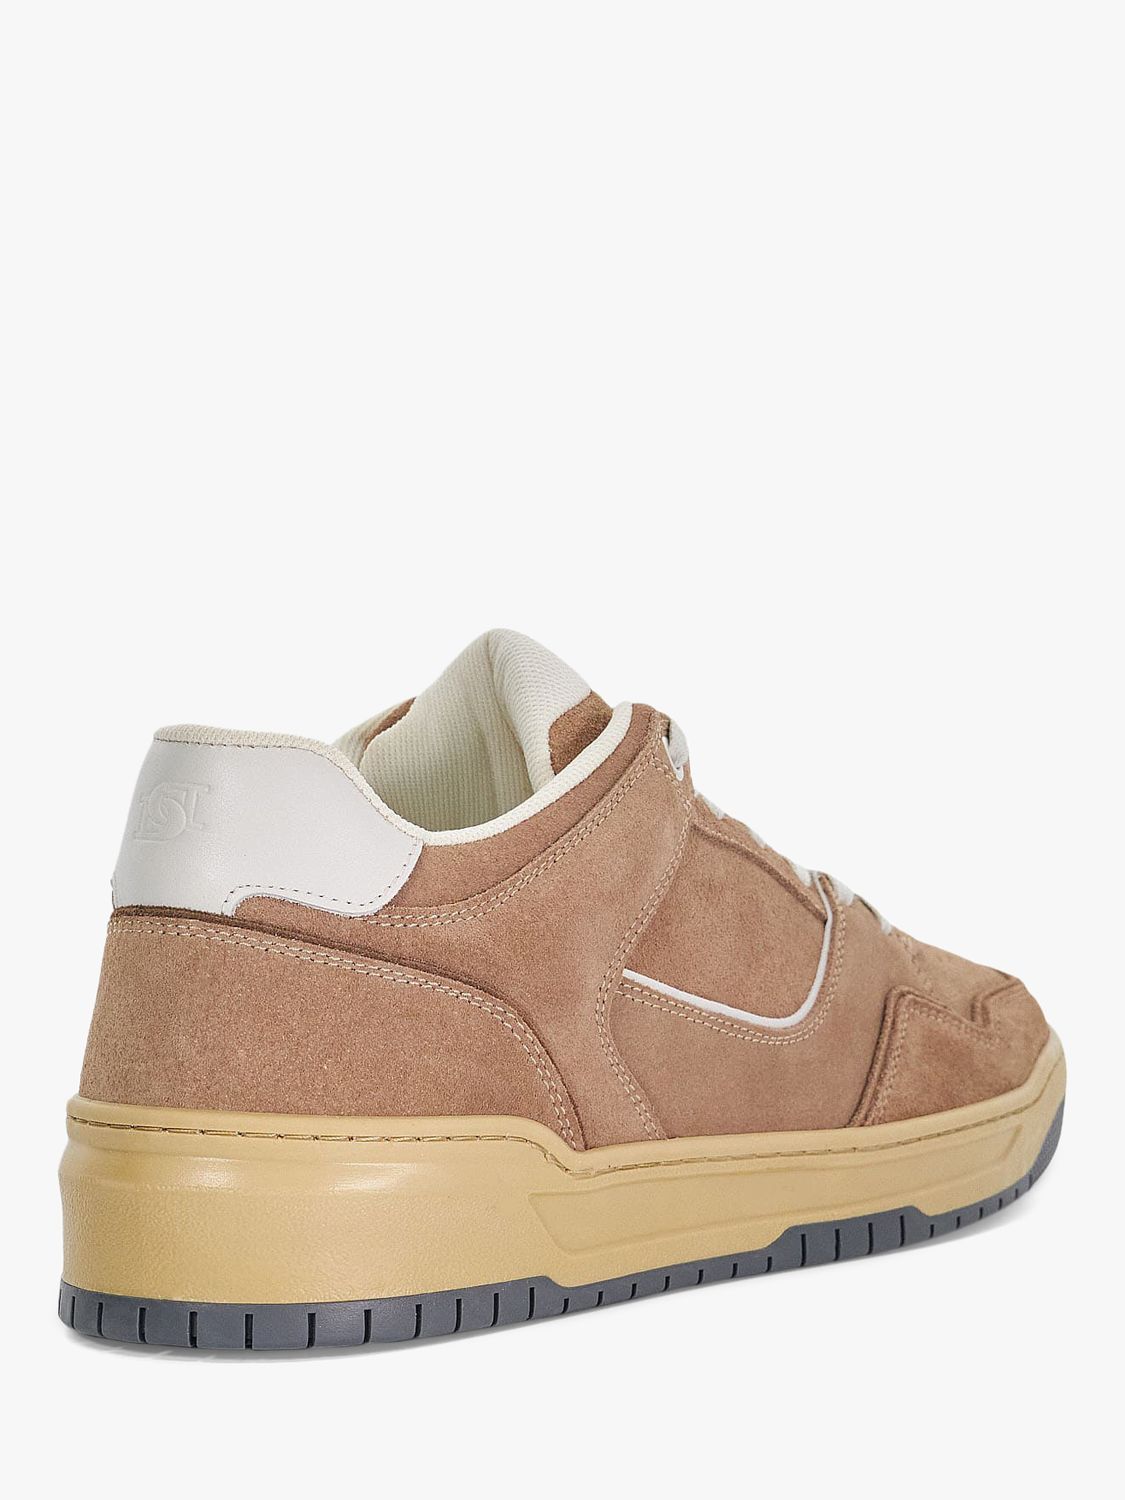 Dune Tainted Suede Trainers, Beige, 7